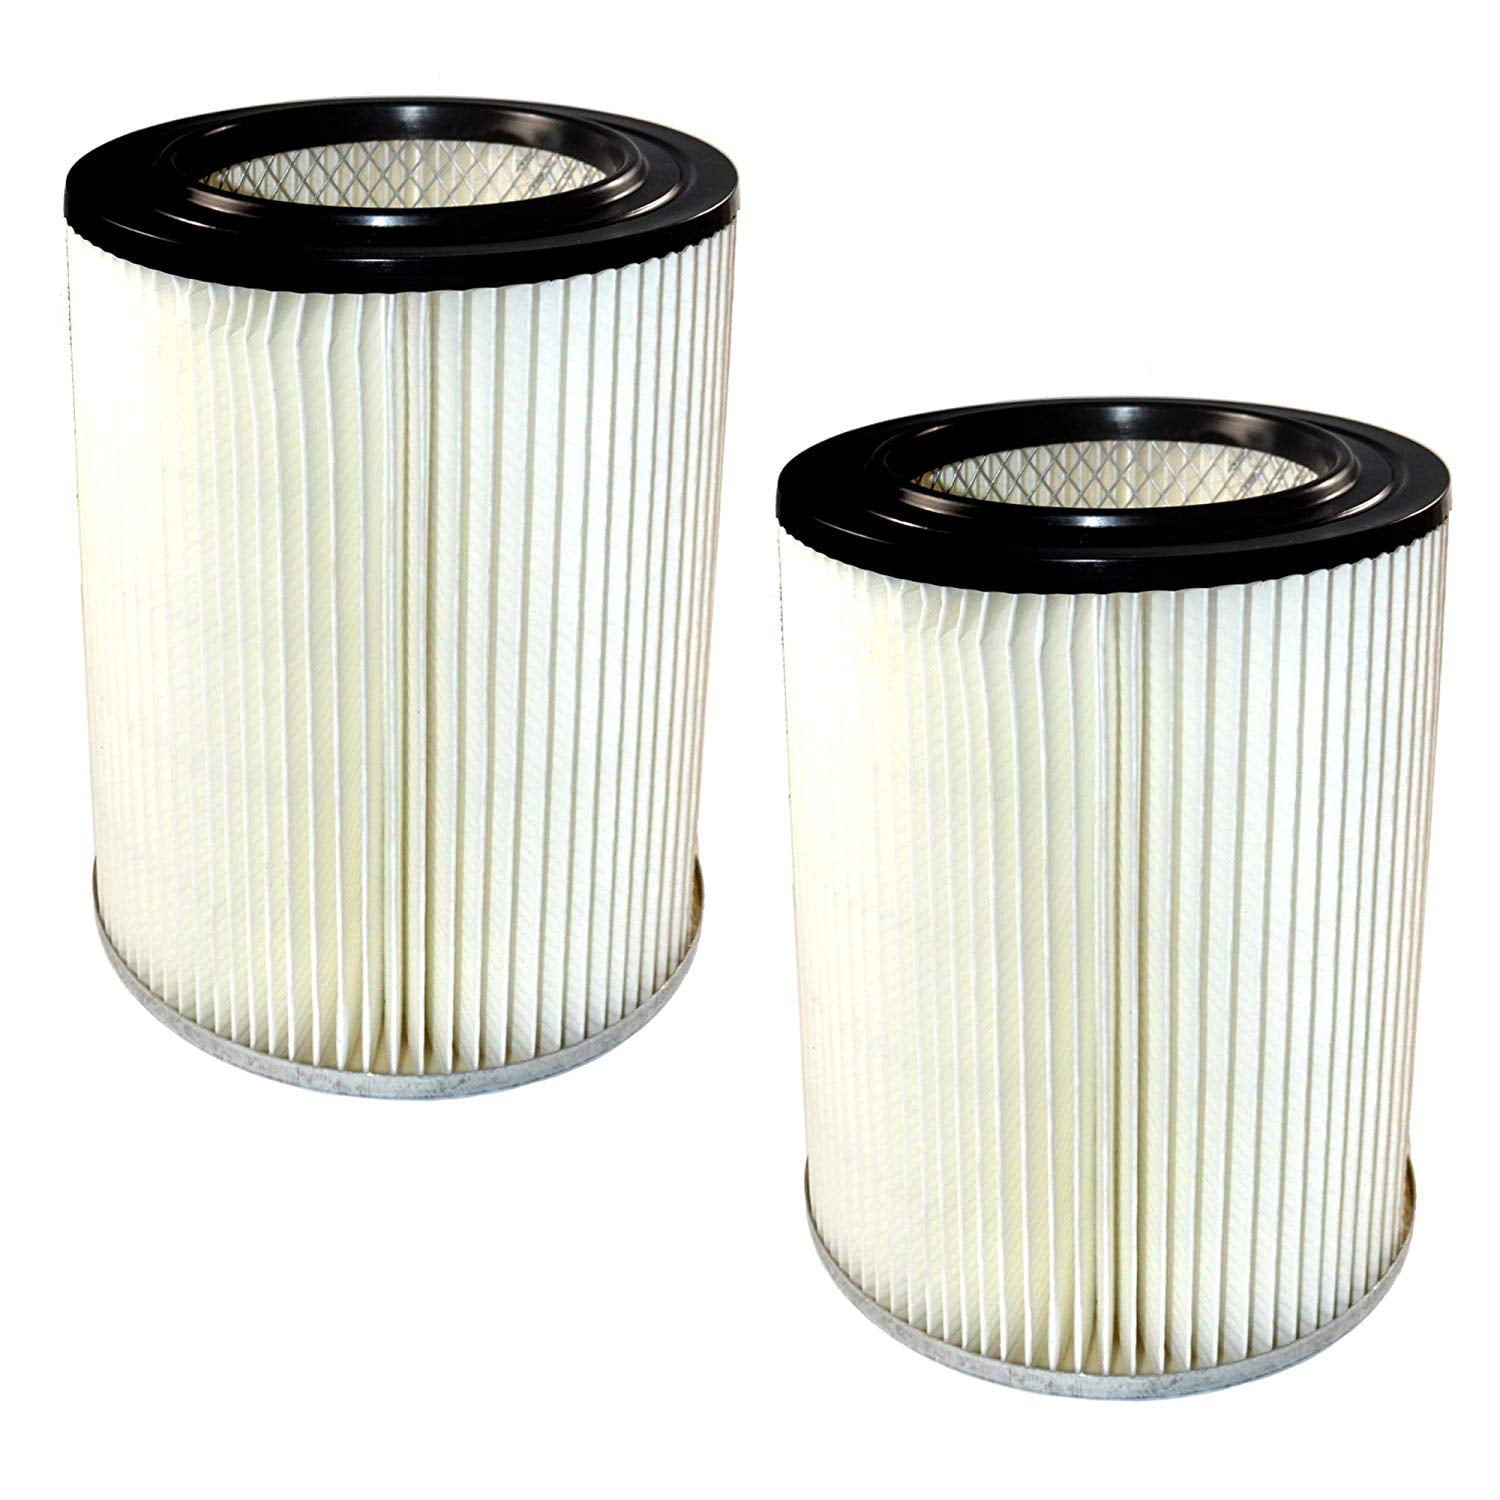 Dry Filter Replacement For Craftsman Shop Vac 5,6,9,12,16,32 Gallon W Cap Details about   Wet 